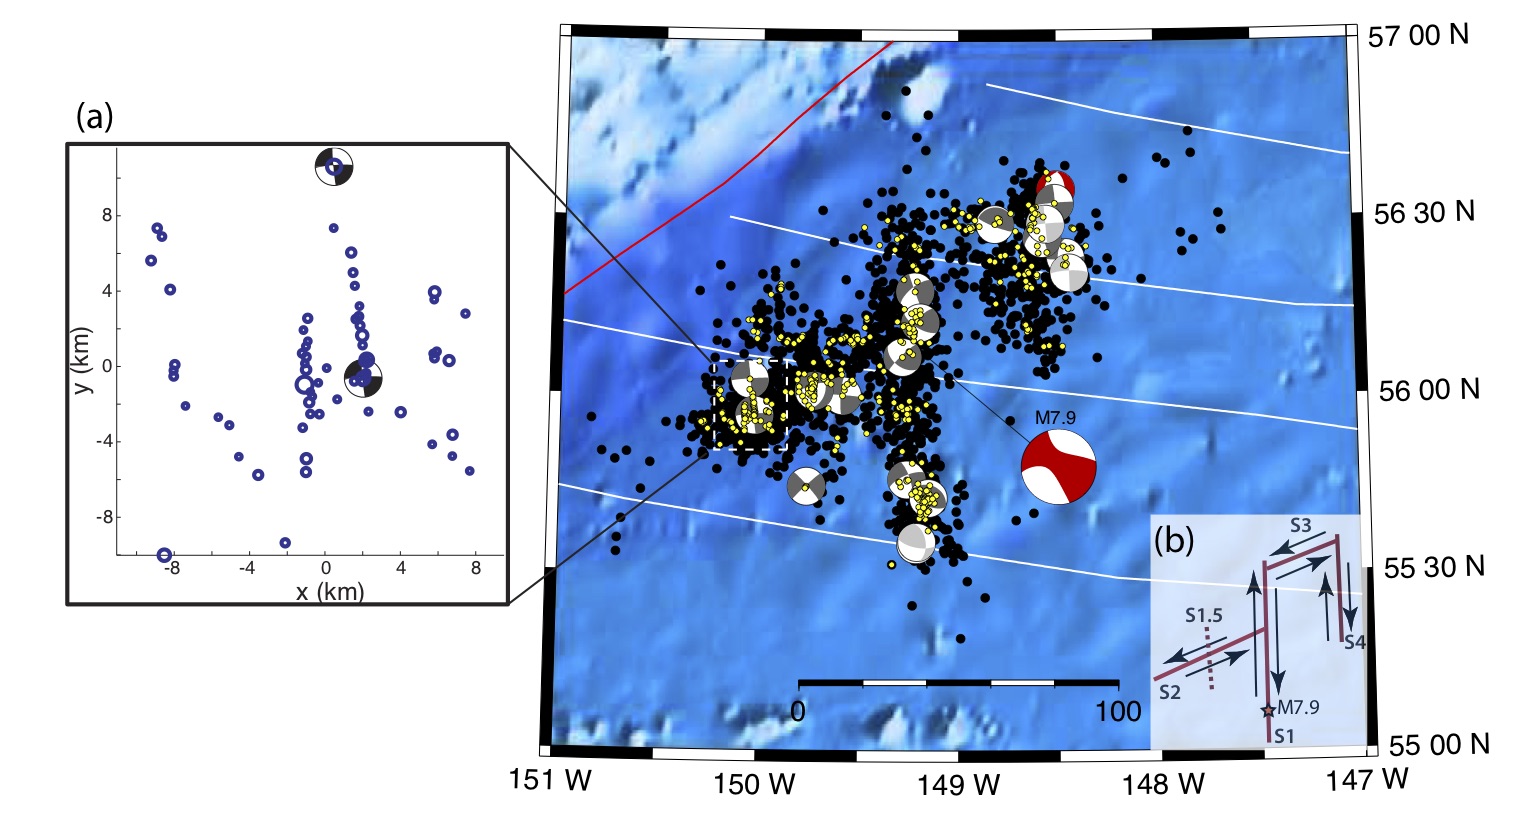 Map of the aftershocks and moment tensors